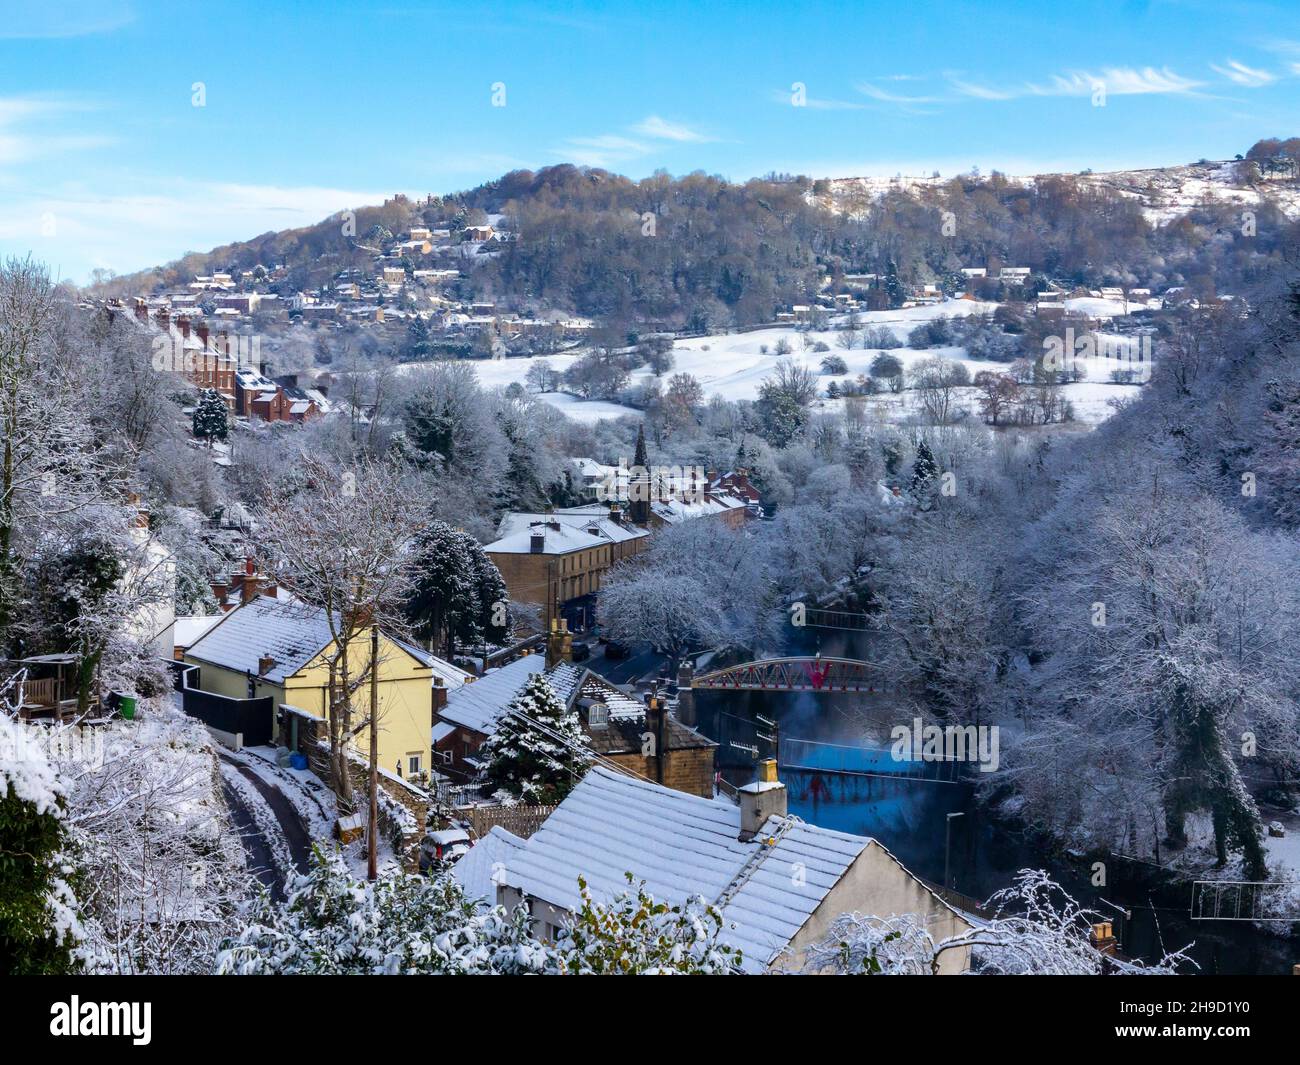 Snow covered landscape with trees at Matlock Bath in the Derbyshire Peak District England UK with River Derwent in the foreground. Stock Photo